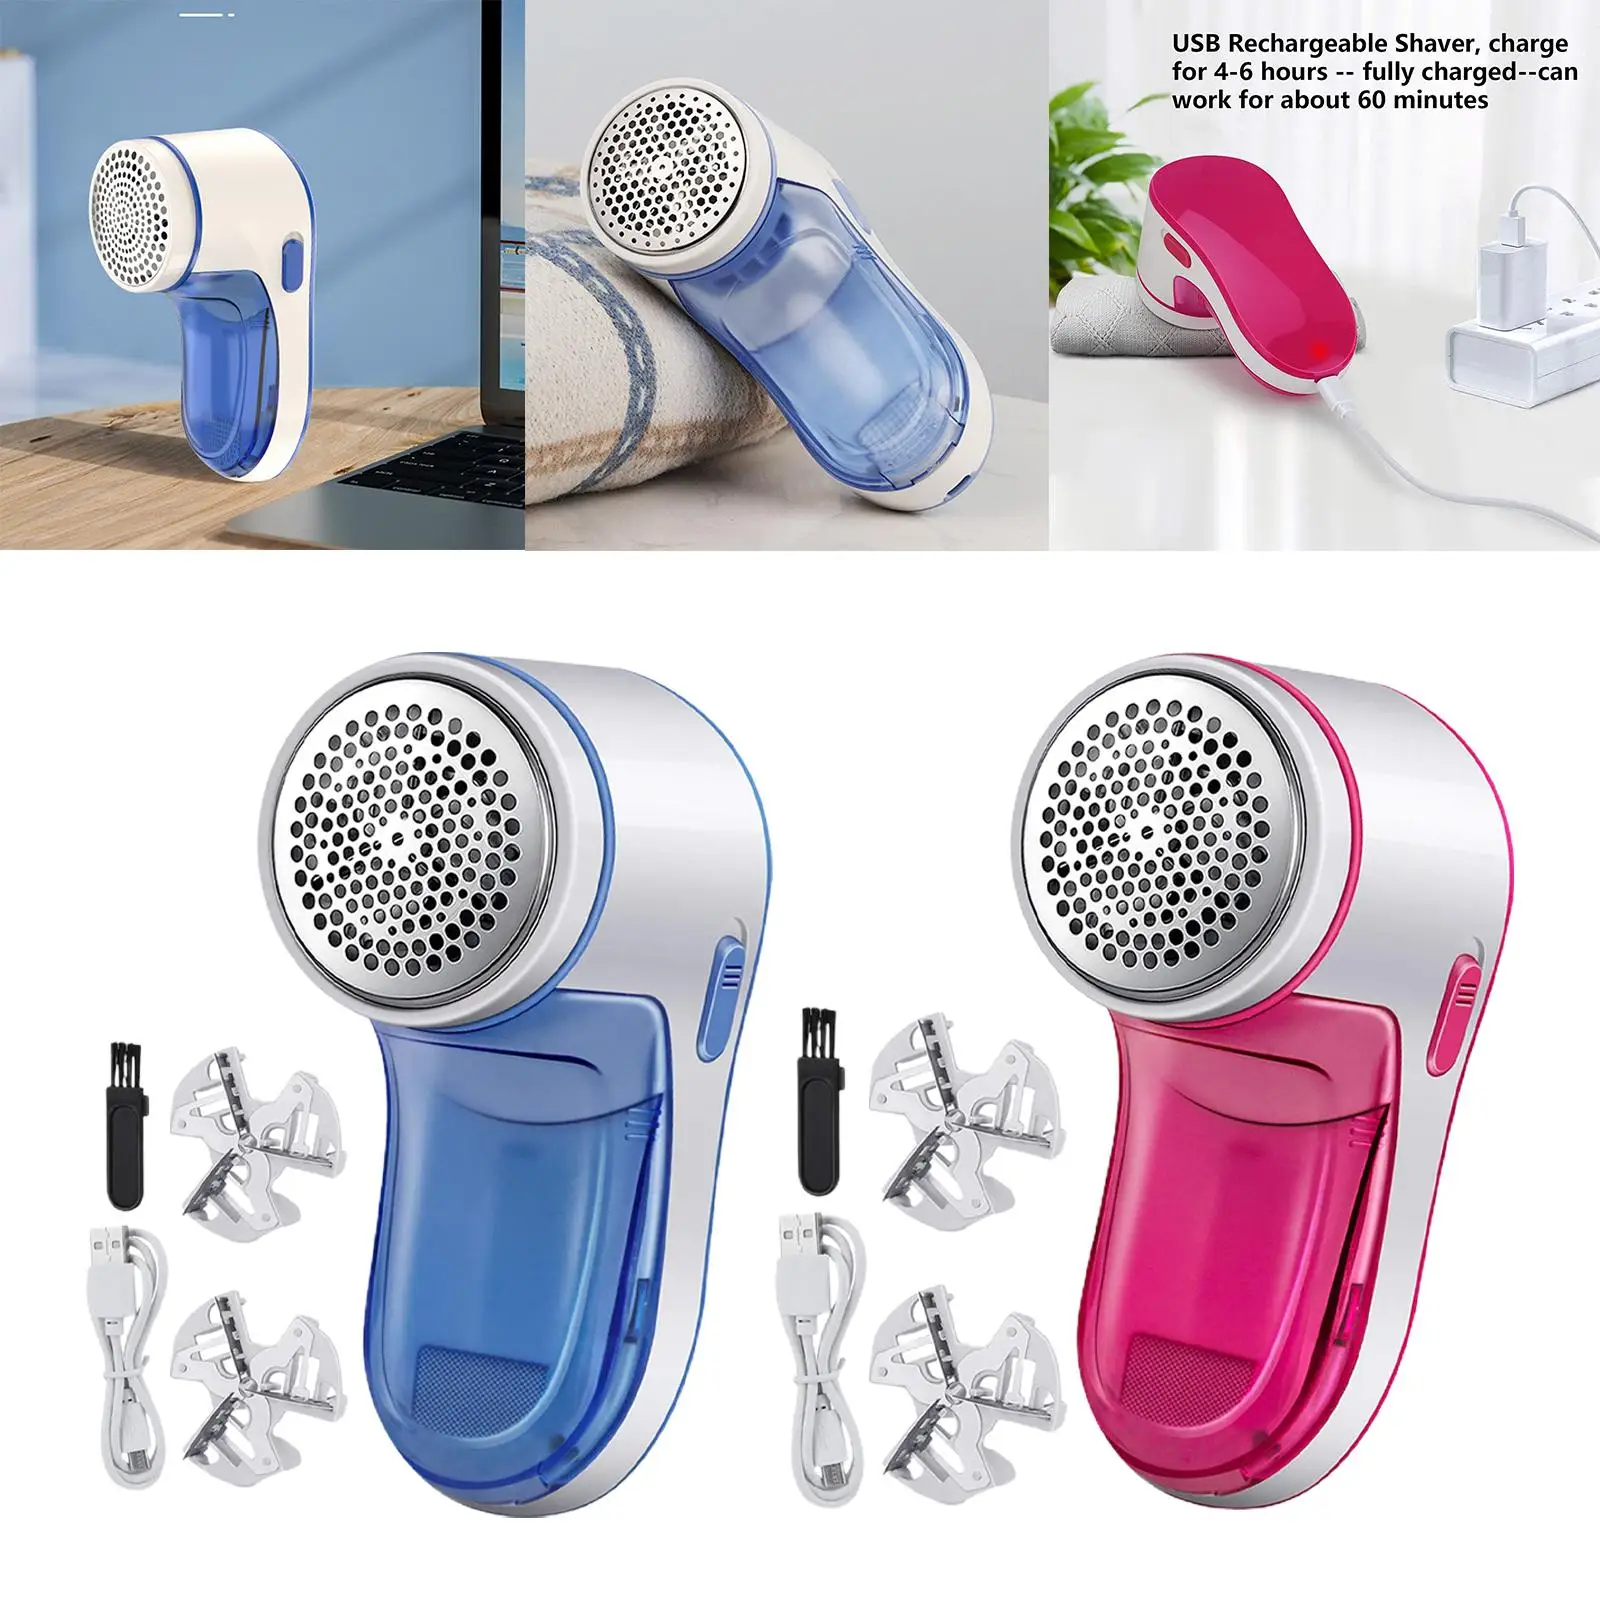 Portable Lint Remover Fabric Shaver Remover USB Honeycomb Knives Net Defuzzer for Synthetic Fibers Cotton Clothes Flannel Wool